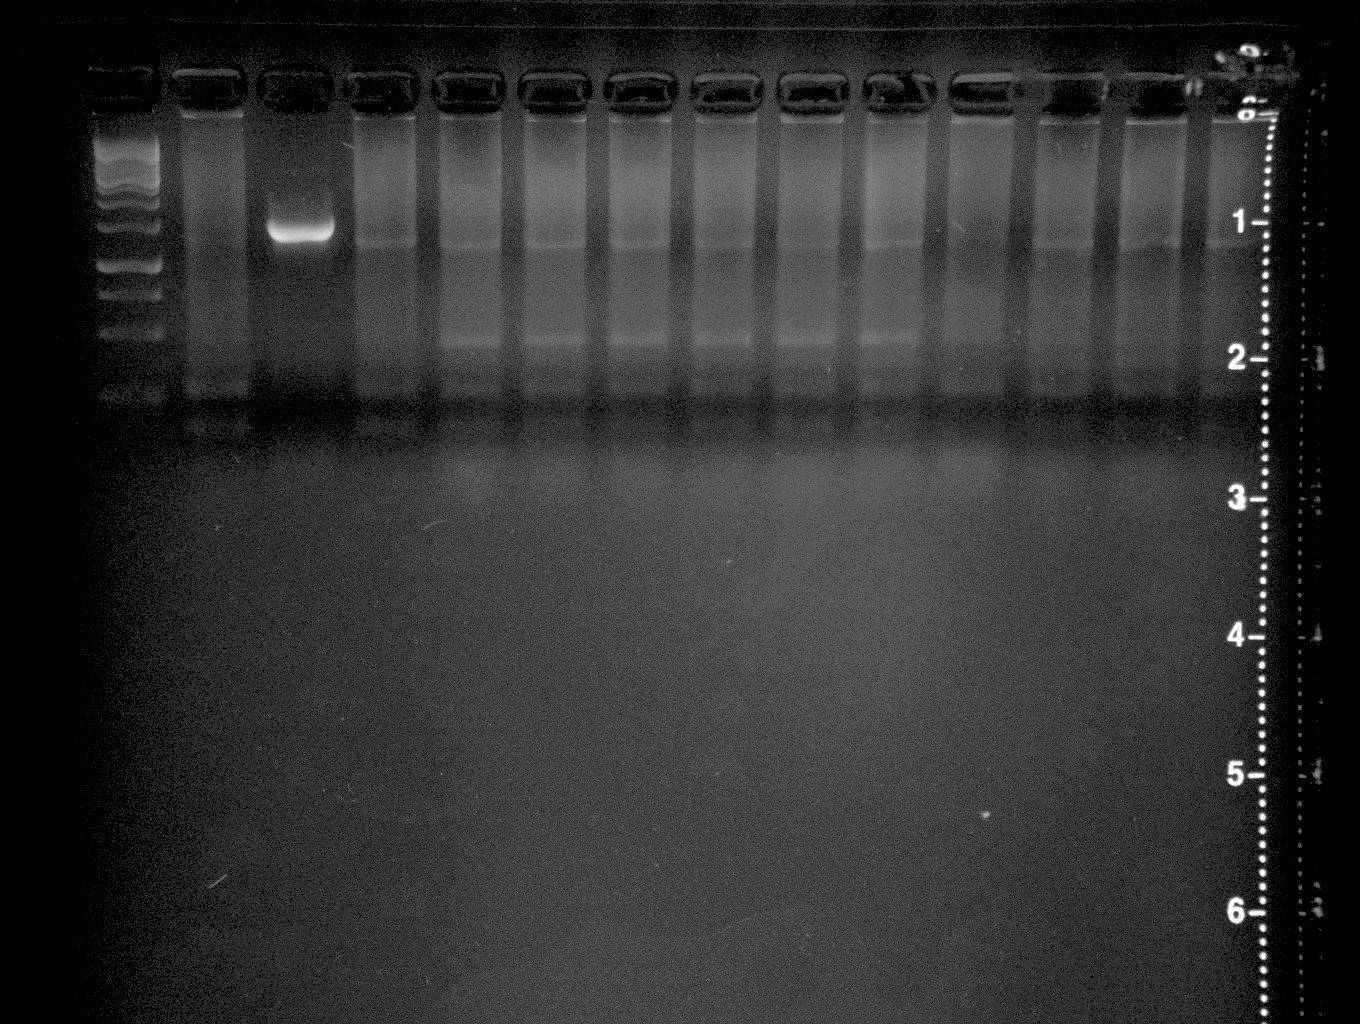 Direpeat amplification by colony PCR